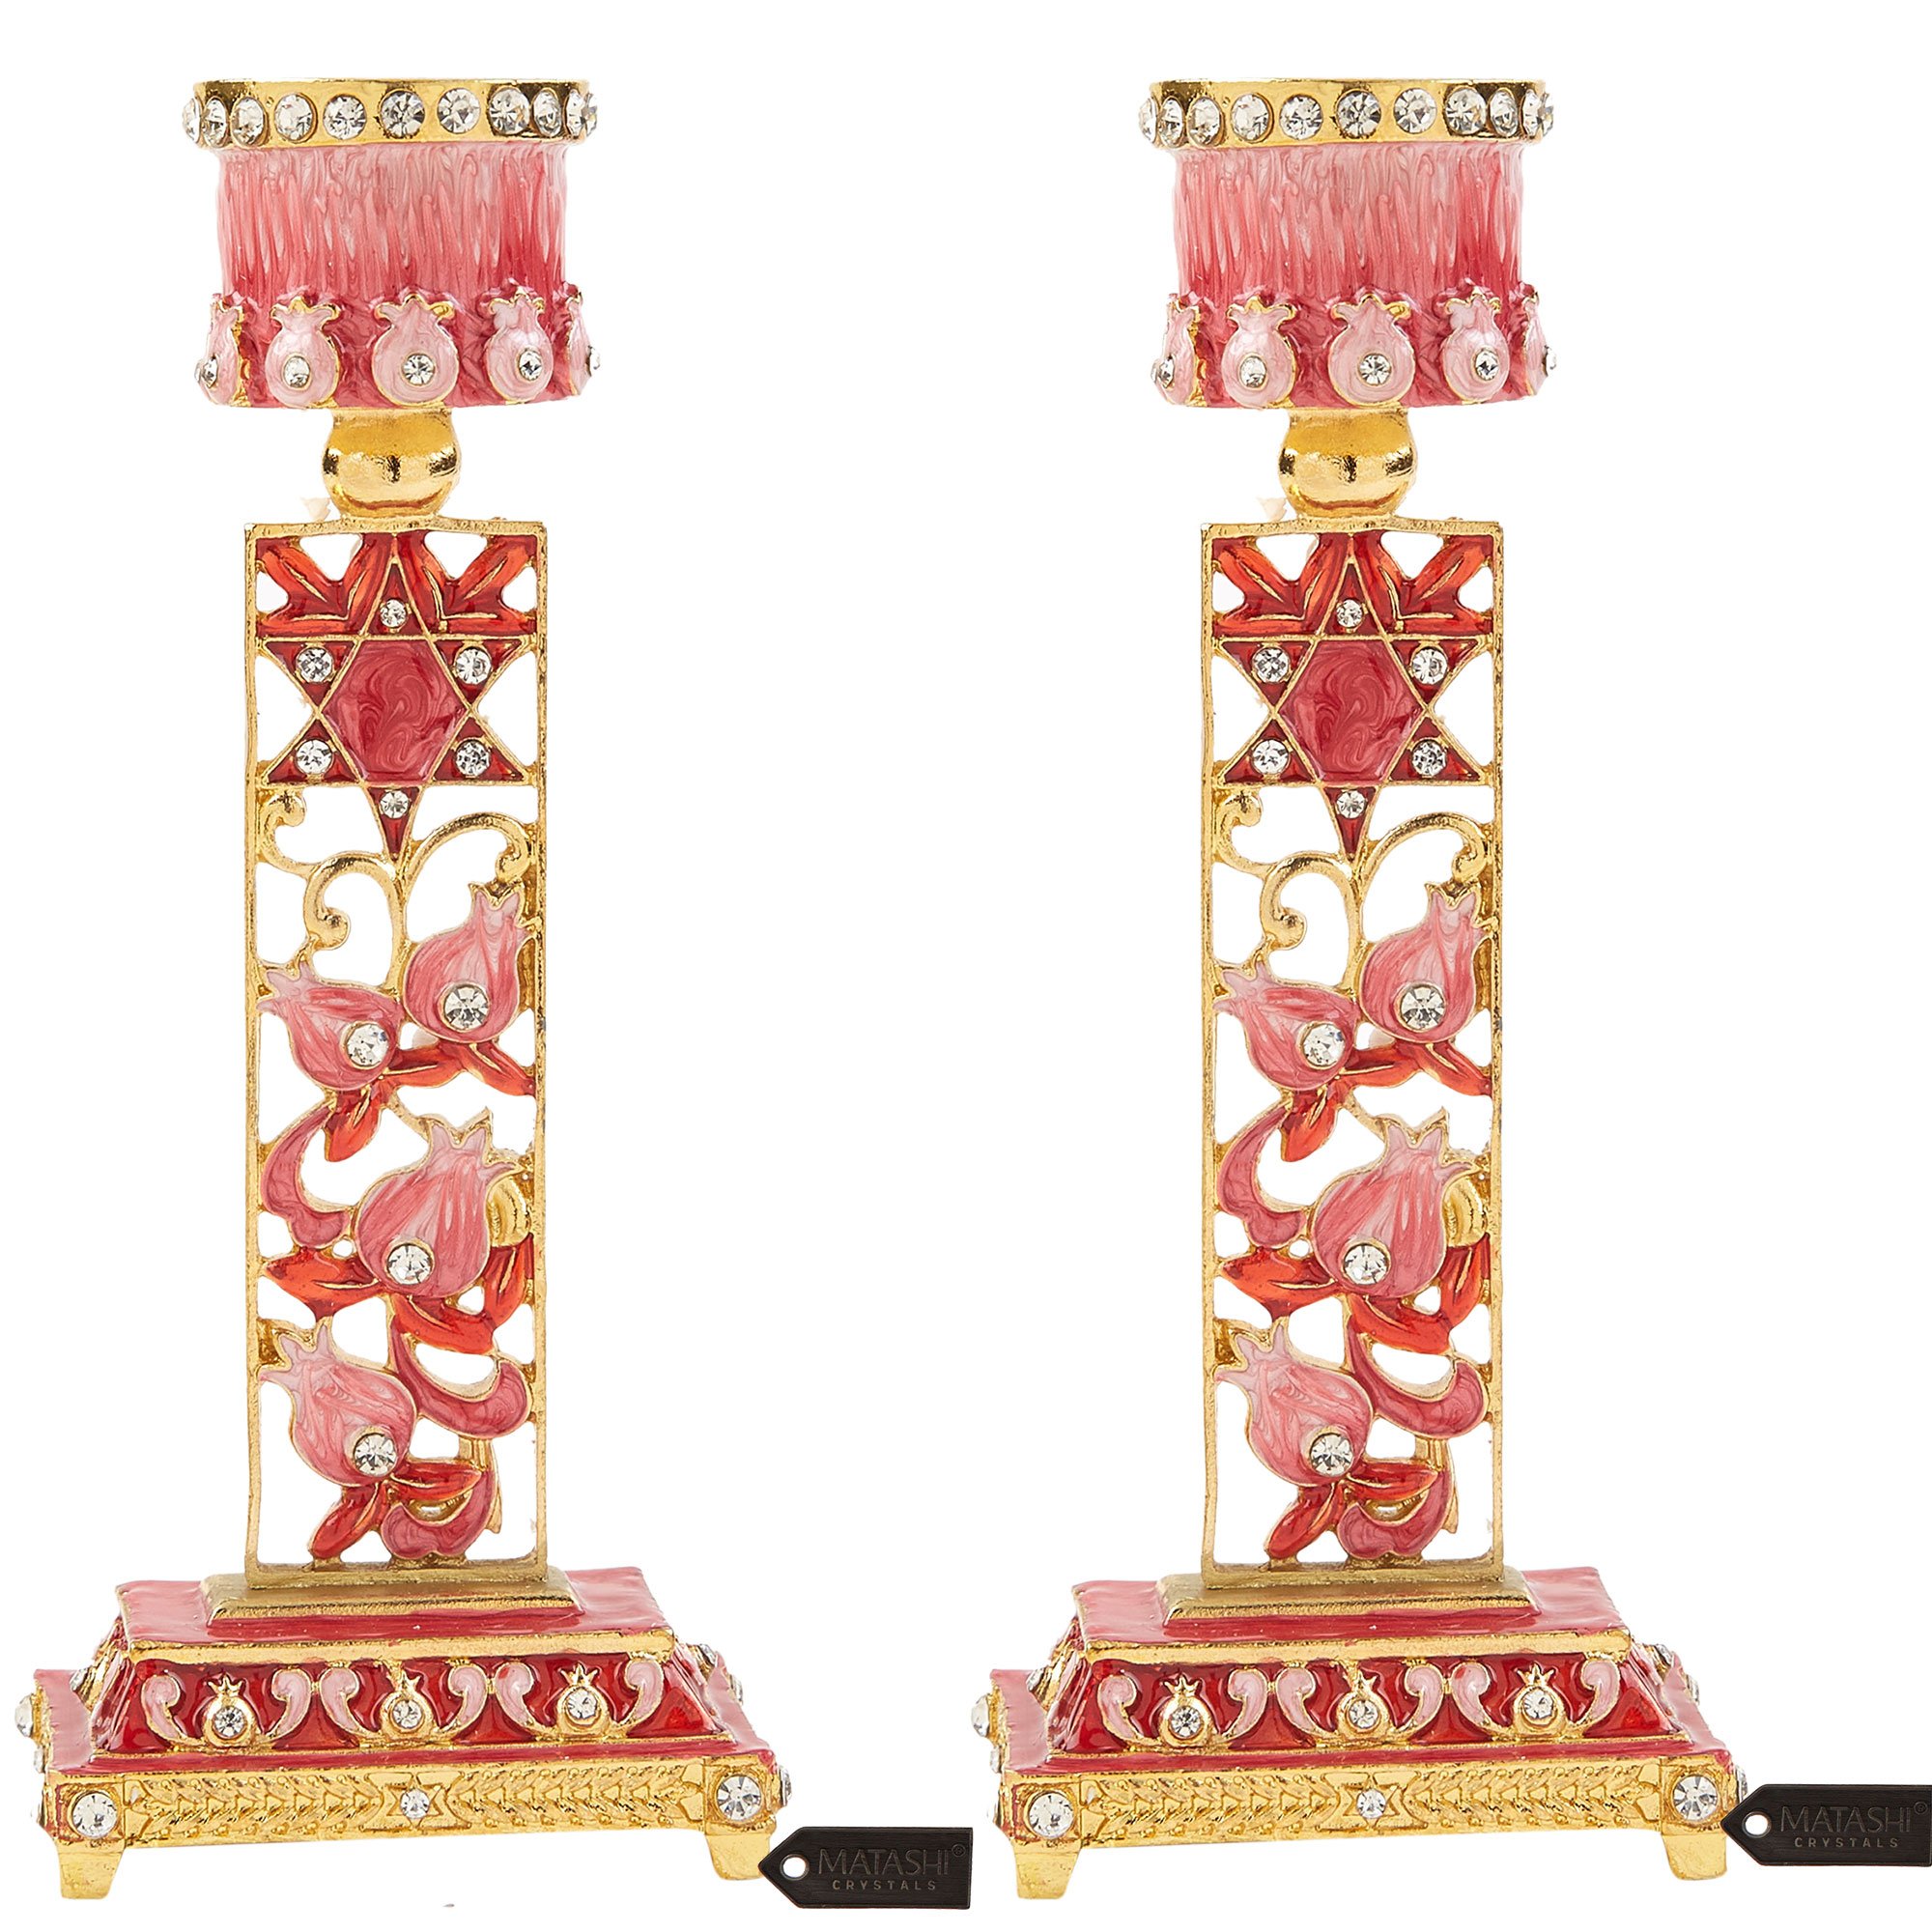 Shabbat Candlestick (2-Piece Set) Hand-Painted, Gold-Plated Pewter Personal Or Religious Enjoyment (Red) By Matashi